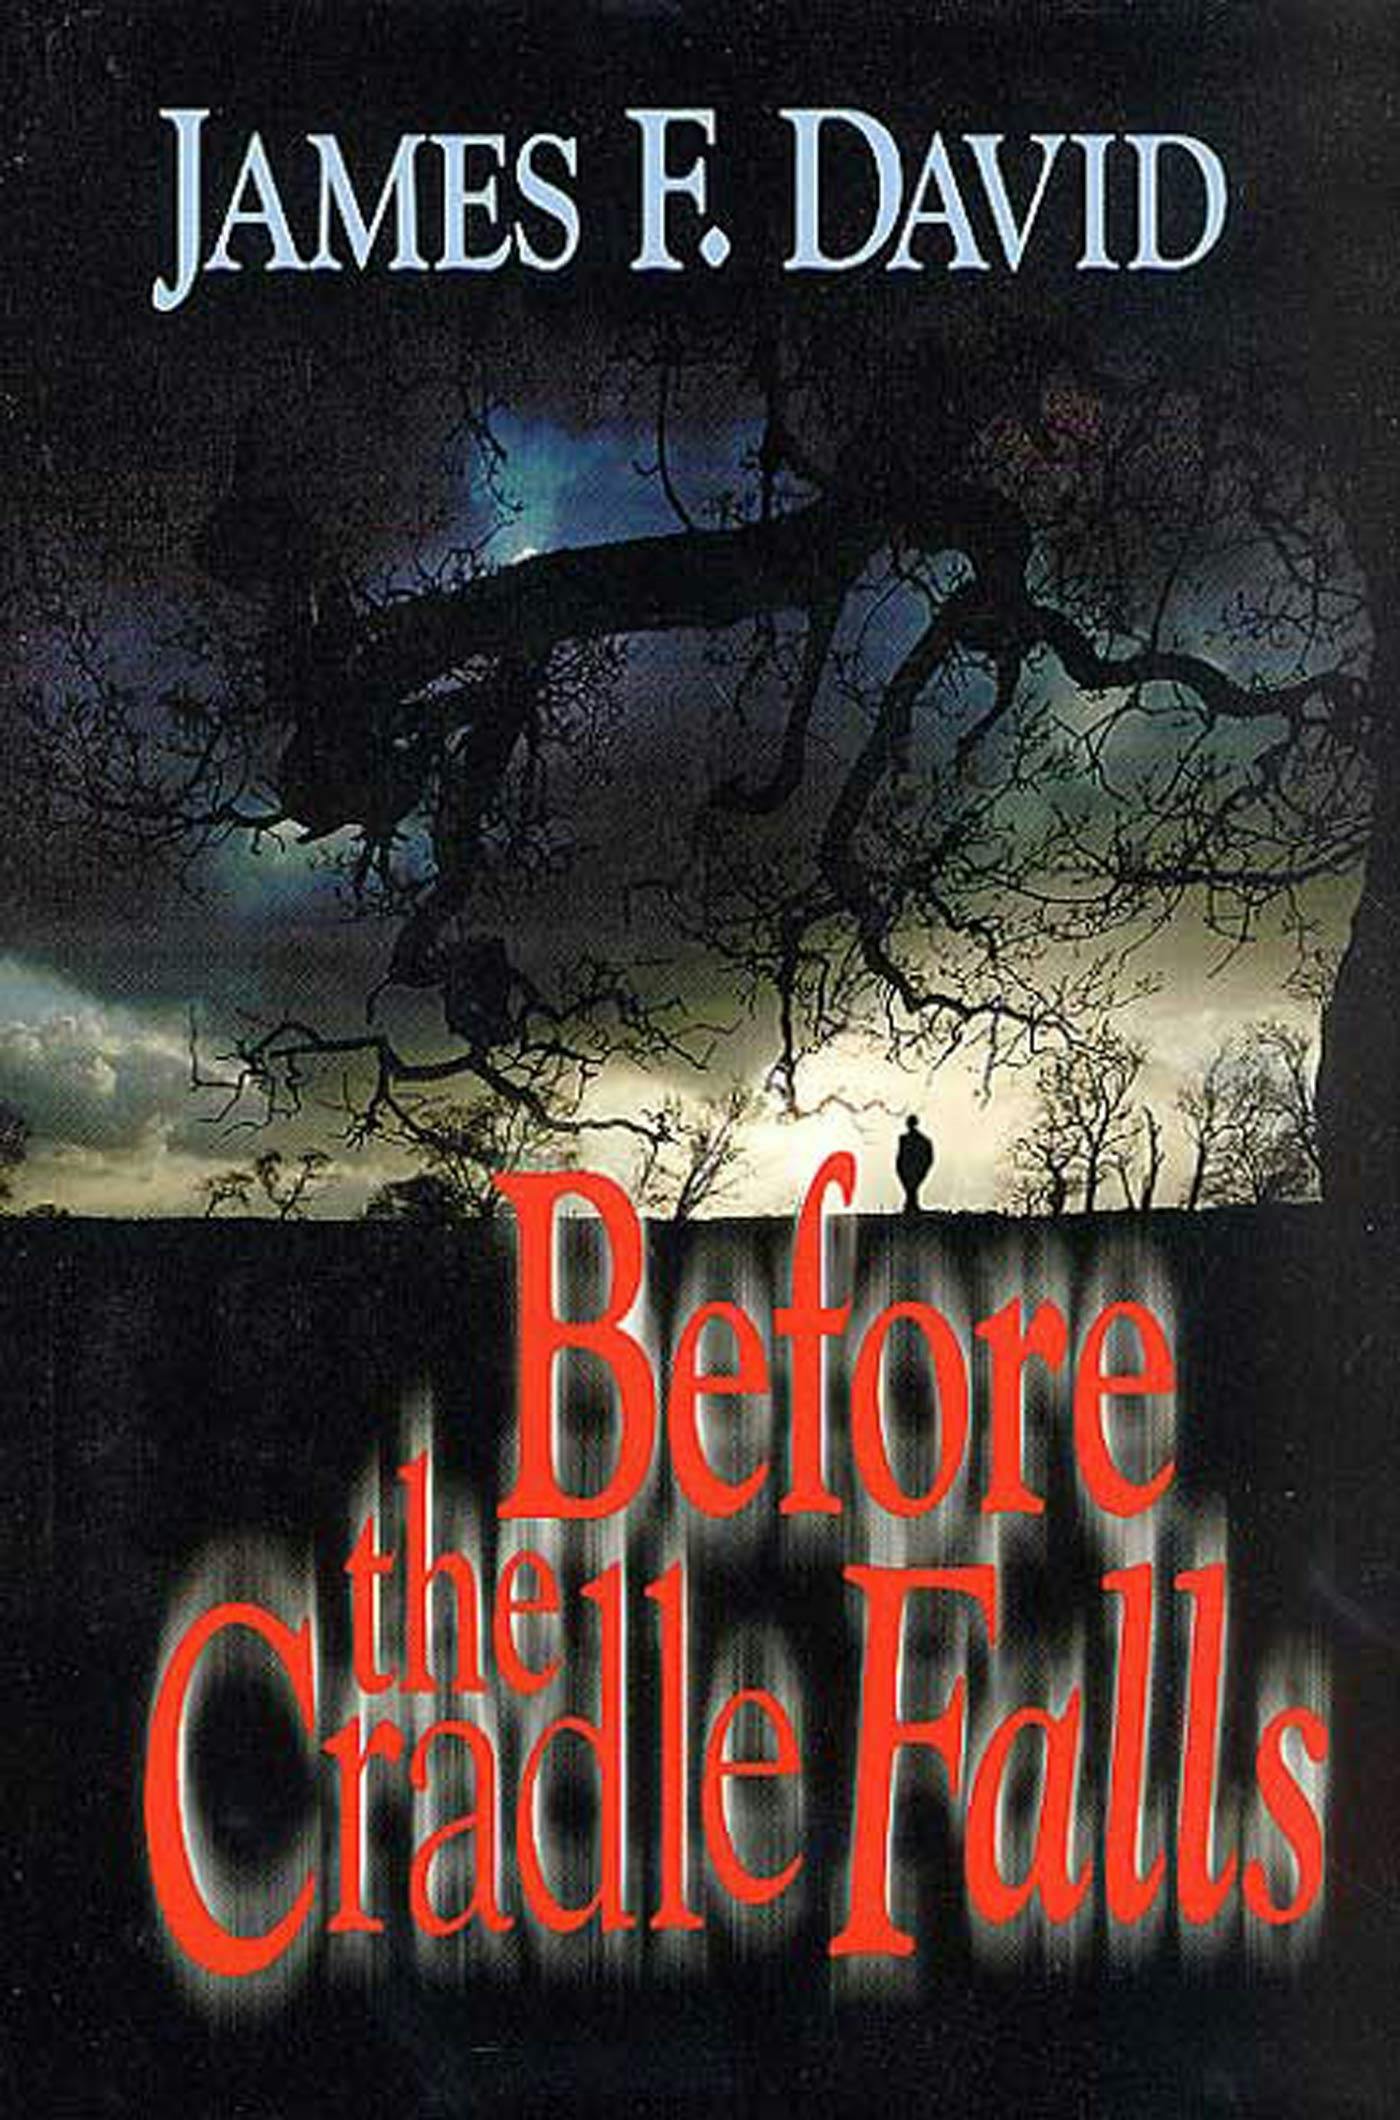 Cover for the book titled as: Before the Cradle Falls